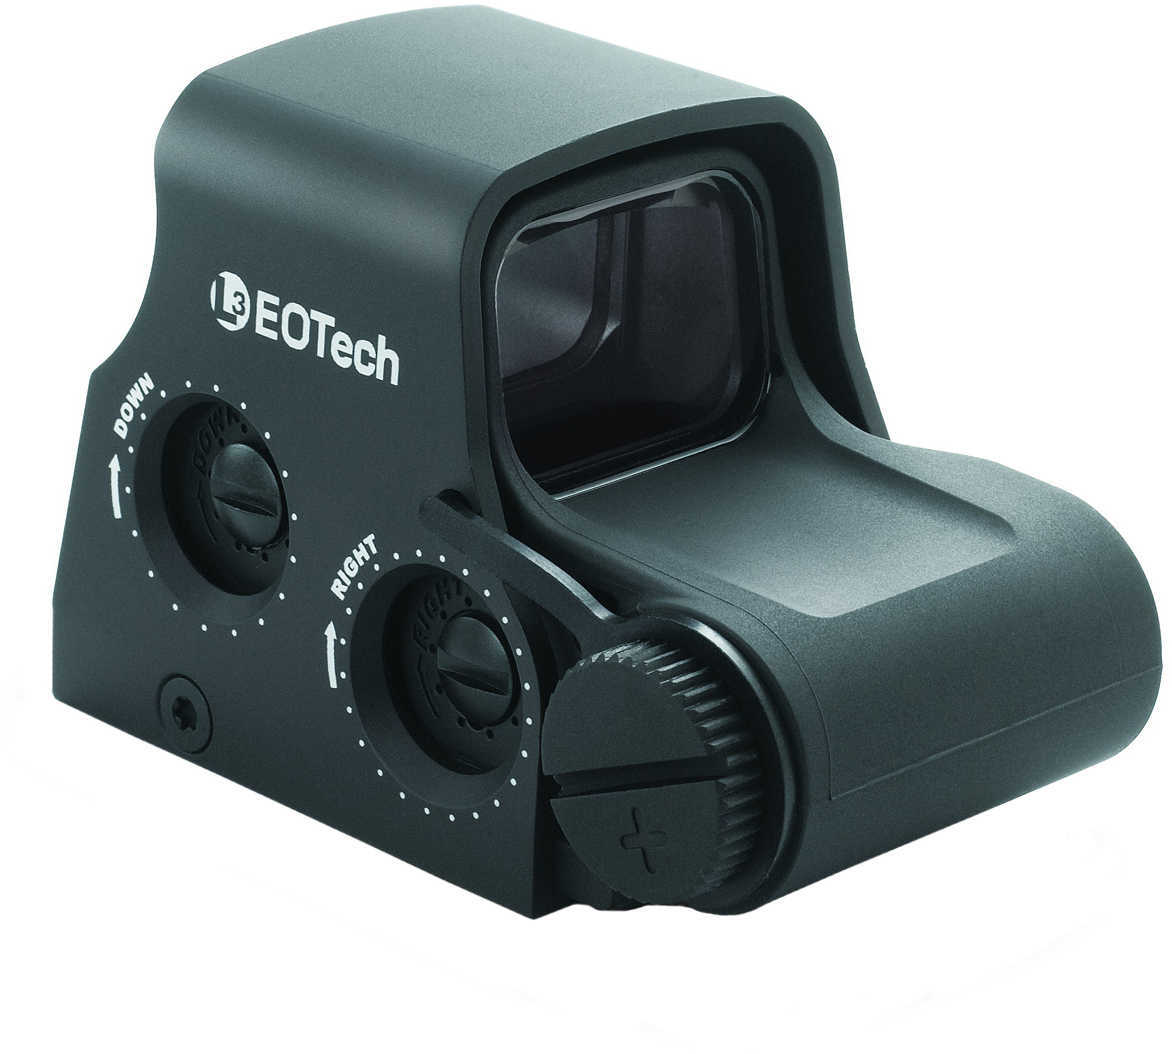 Eotech XPS30 Holographic Weapon Sight 1x 68 MOA Ring/1 Red Dot Black CR123A Lithium